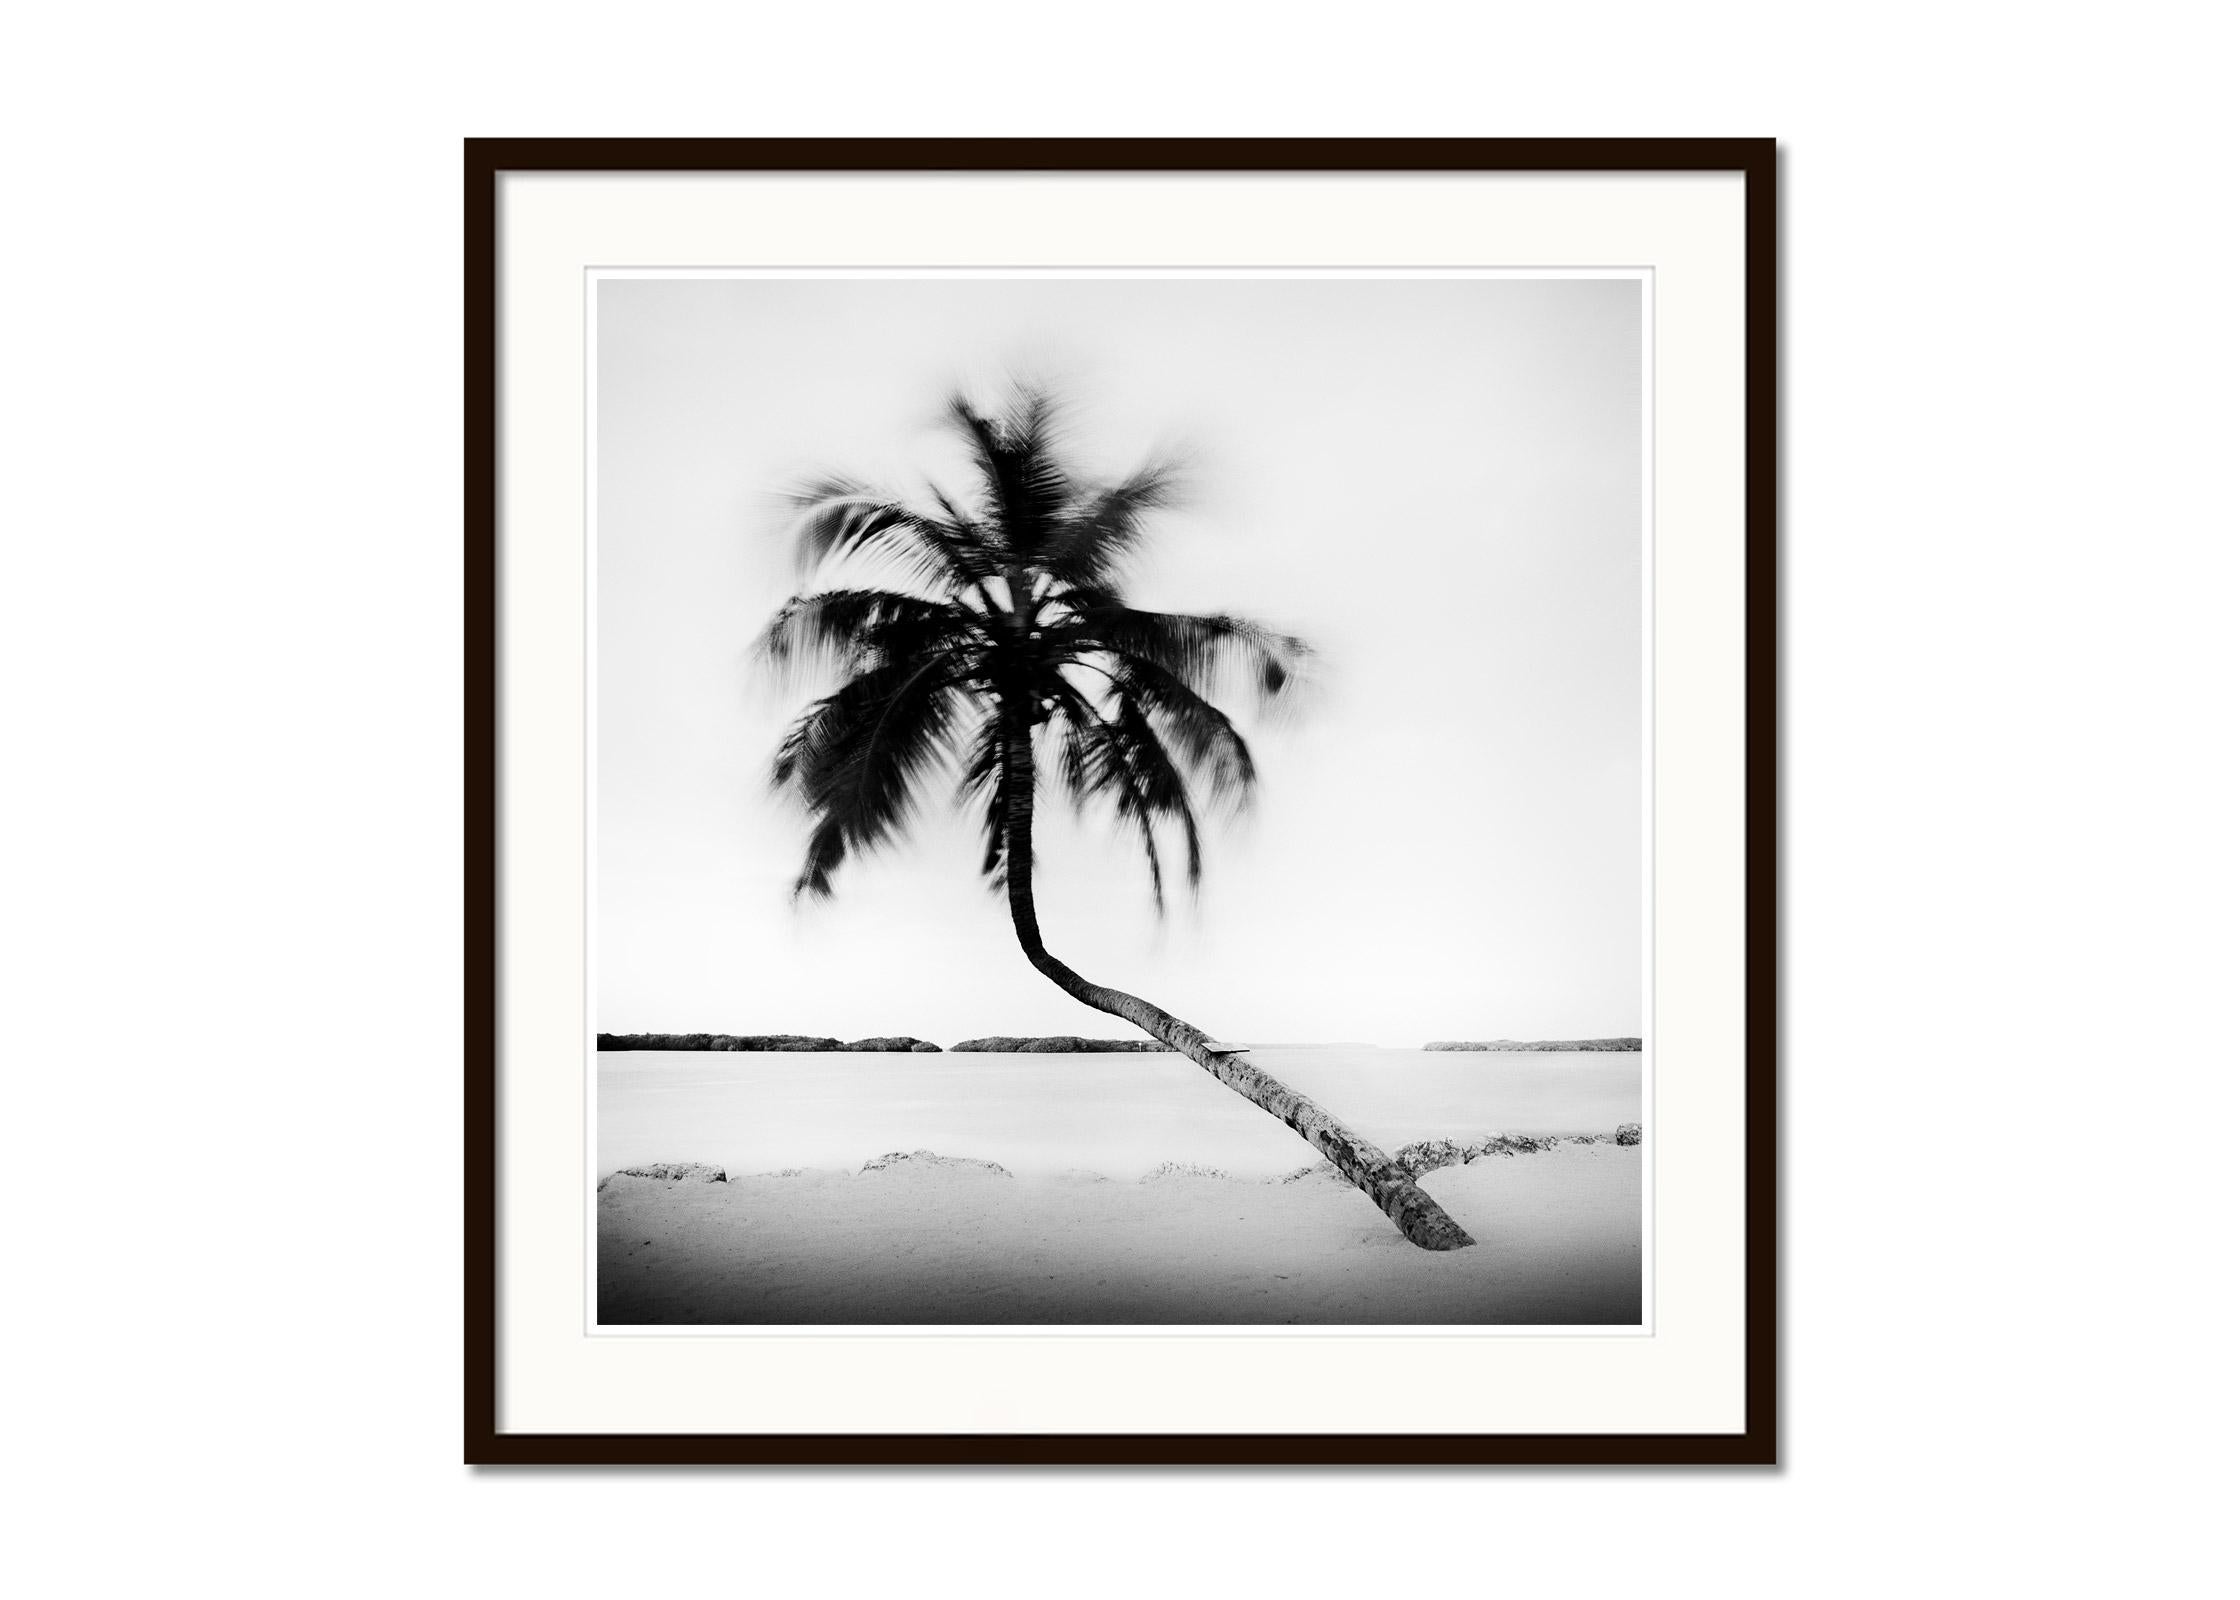 Black and white fine art landscape photography. Archival pigment ink print as part of a limited edition of 9. All Gerald Berghammer prints are made to order in limited editions on Hahnemuehle Photo Rag Baryta. Each print is stamped on the back and